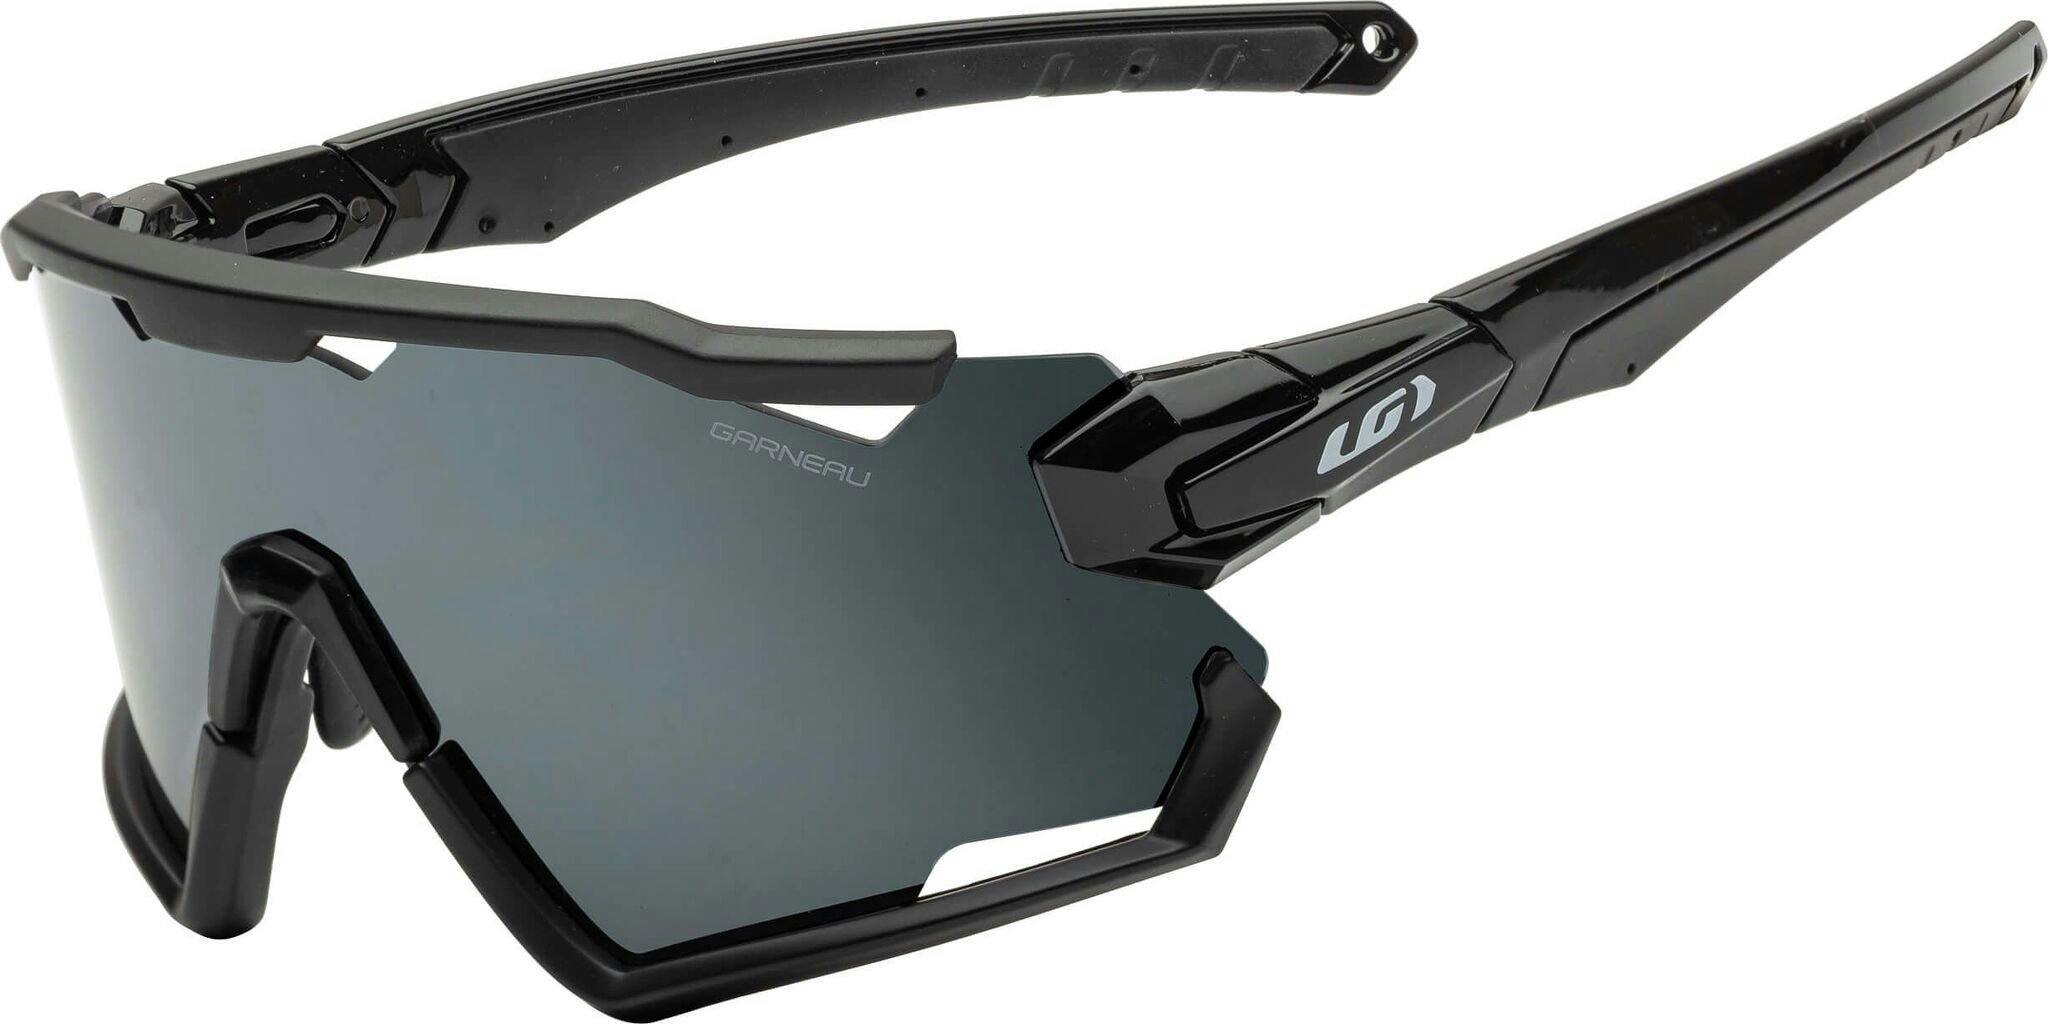 Product image for Tonic Sunglasses